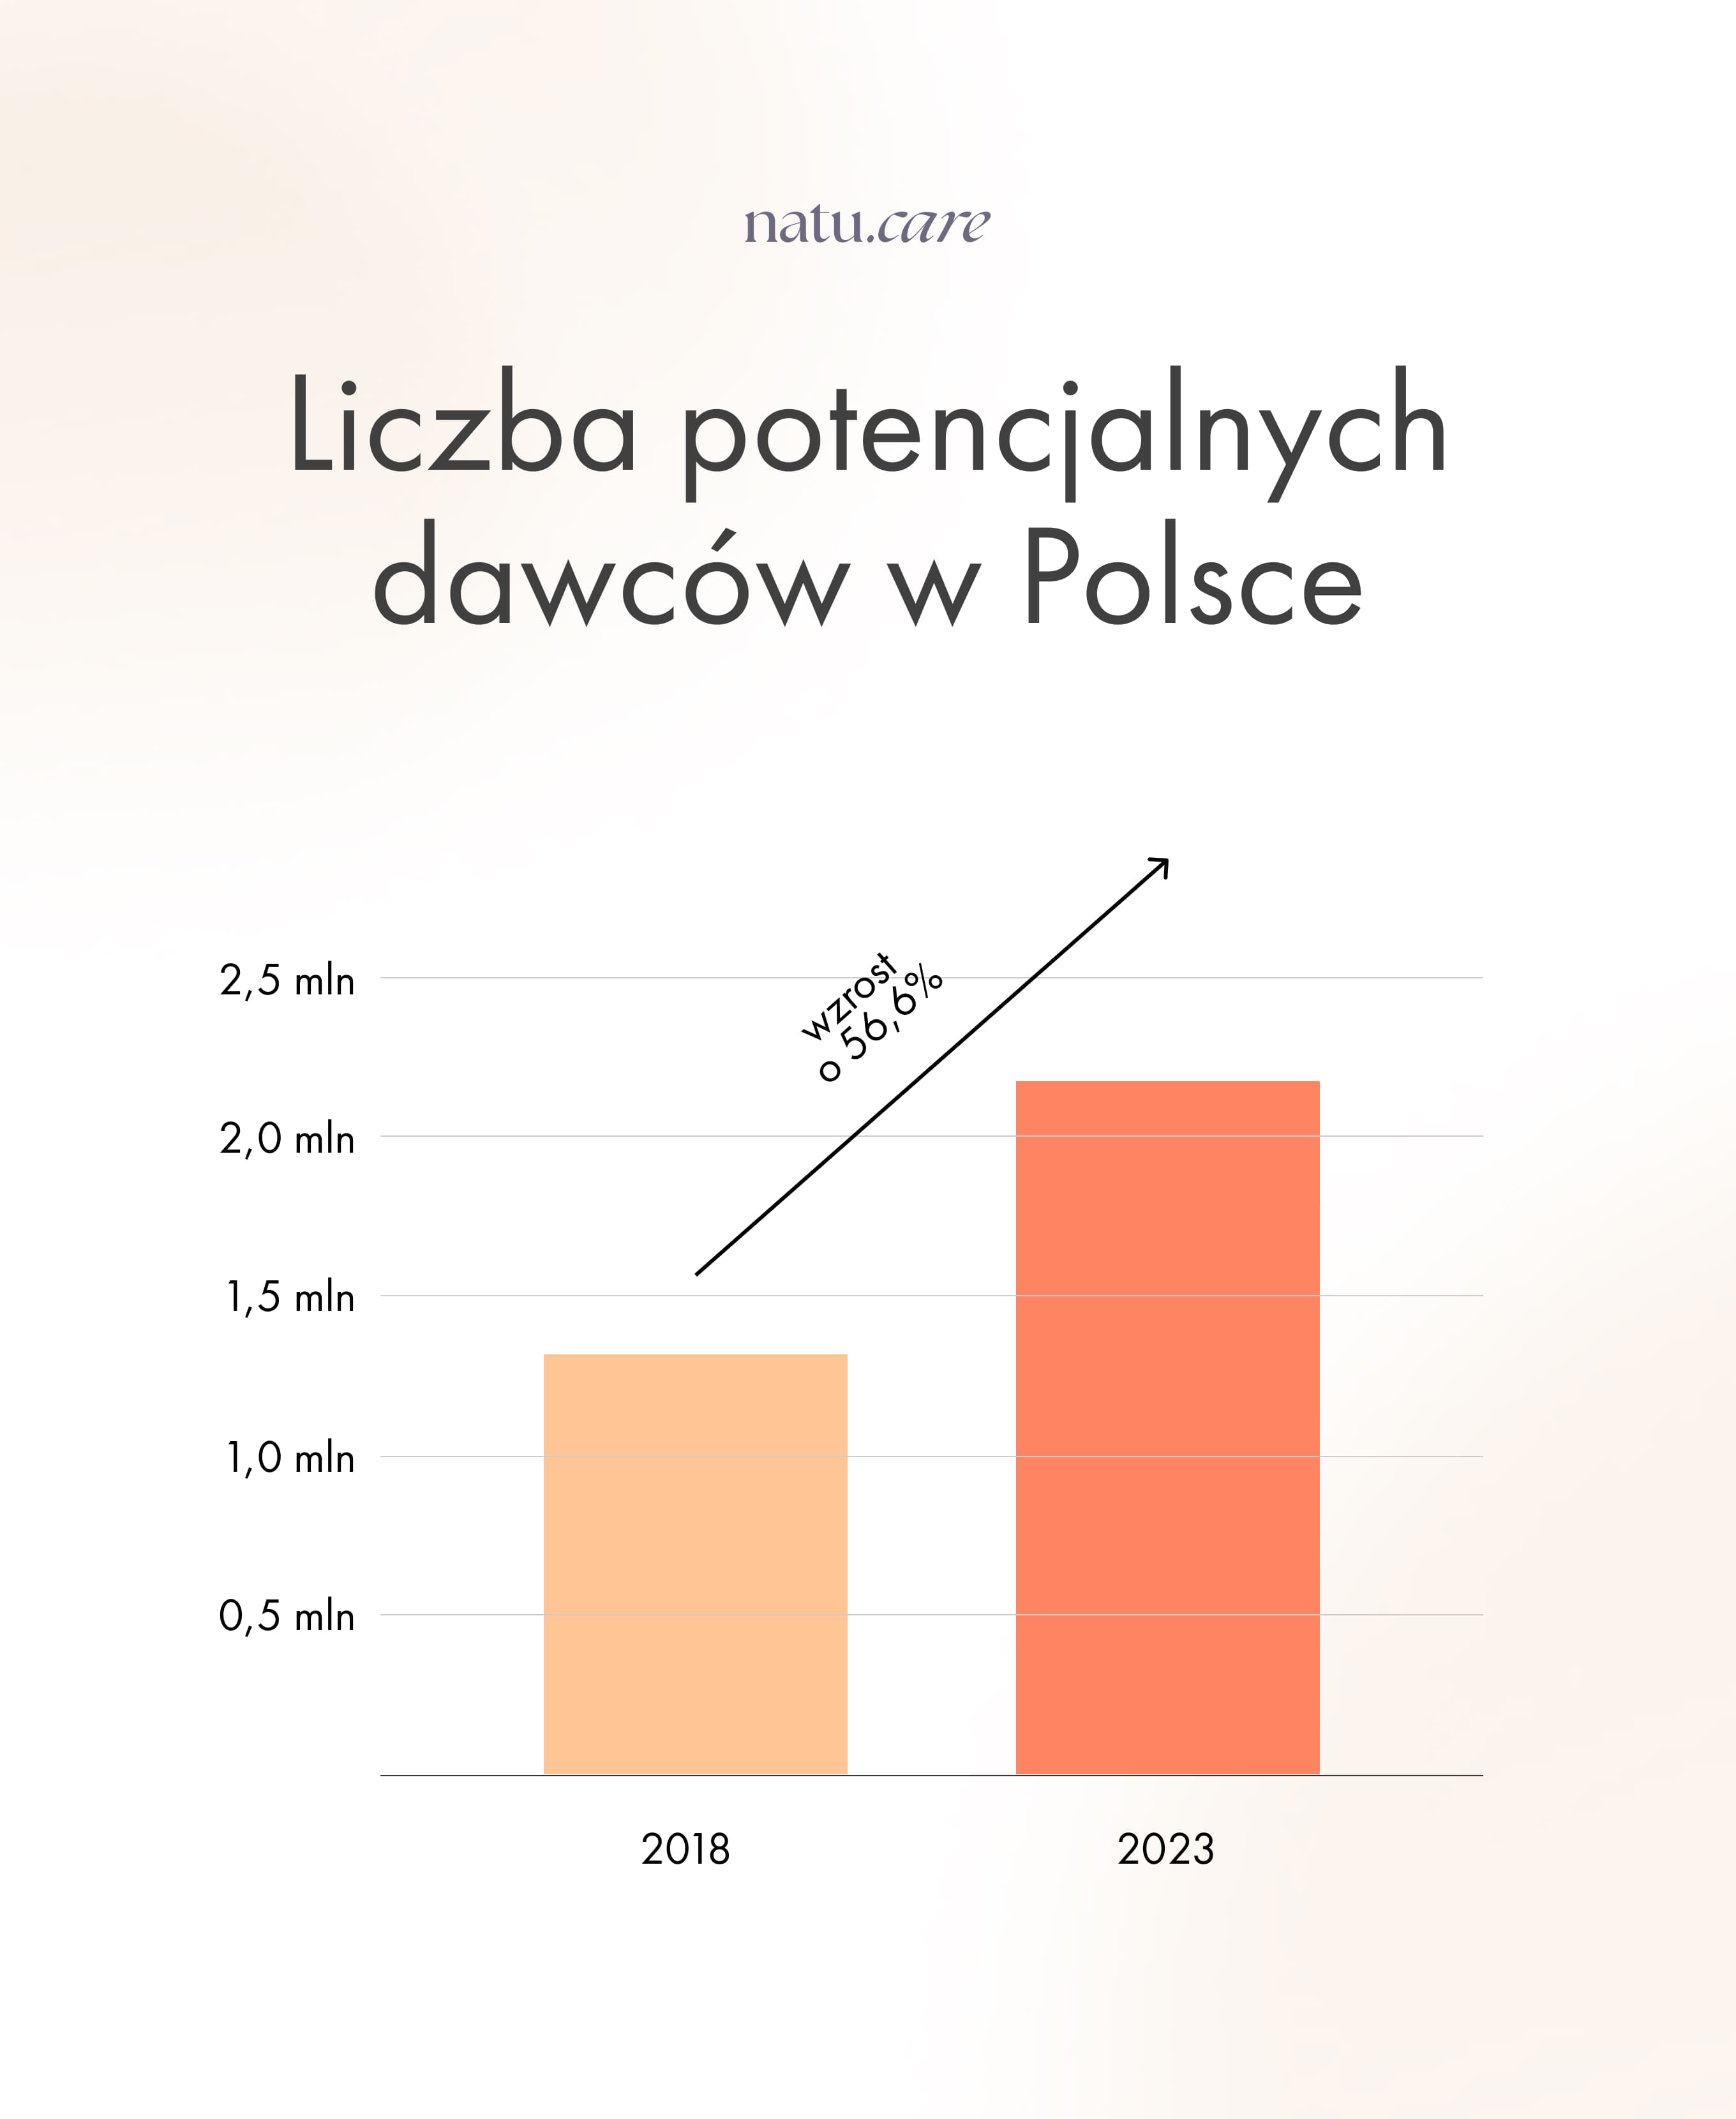 Number of potential bone marrow donors in Poland